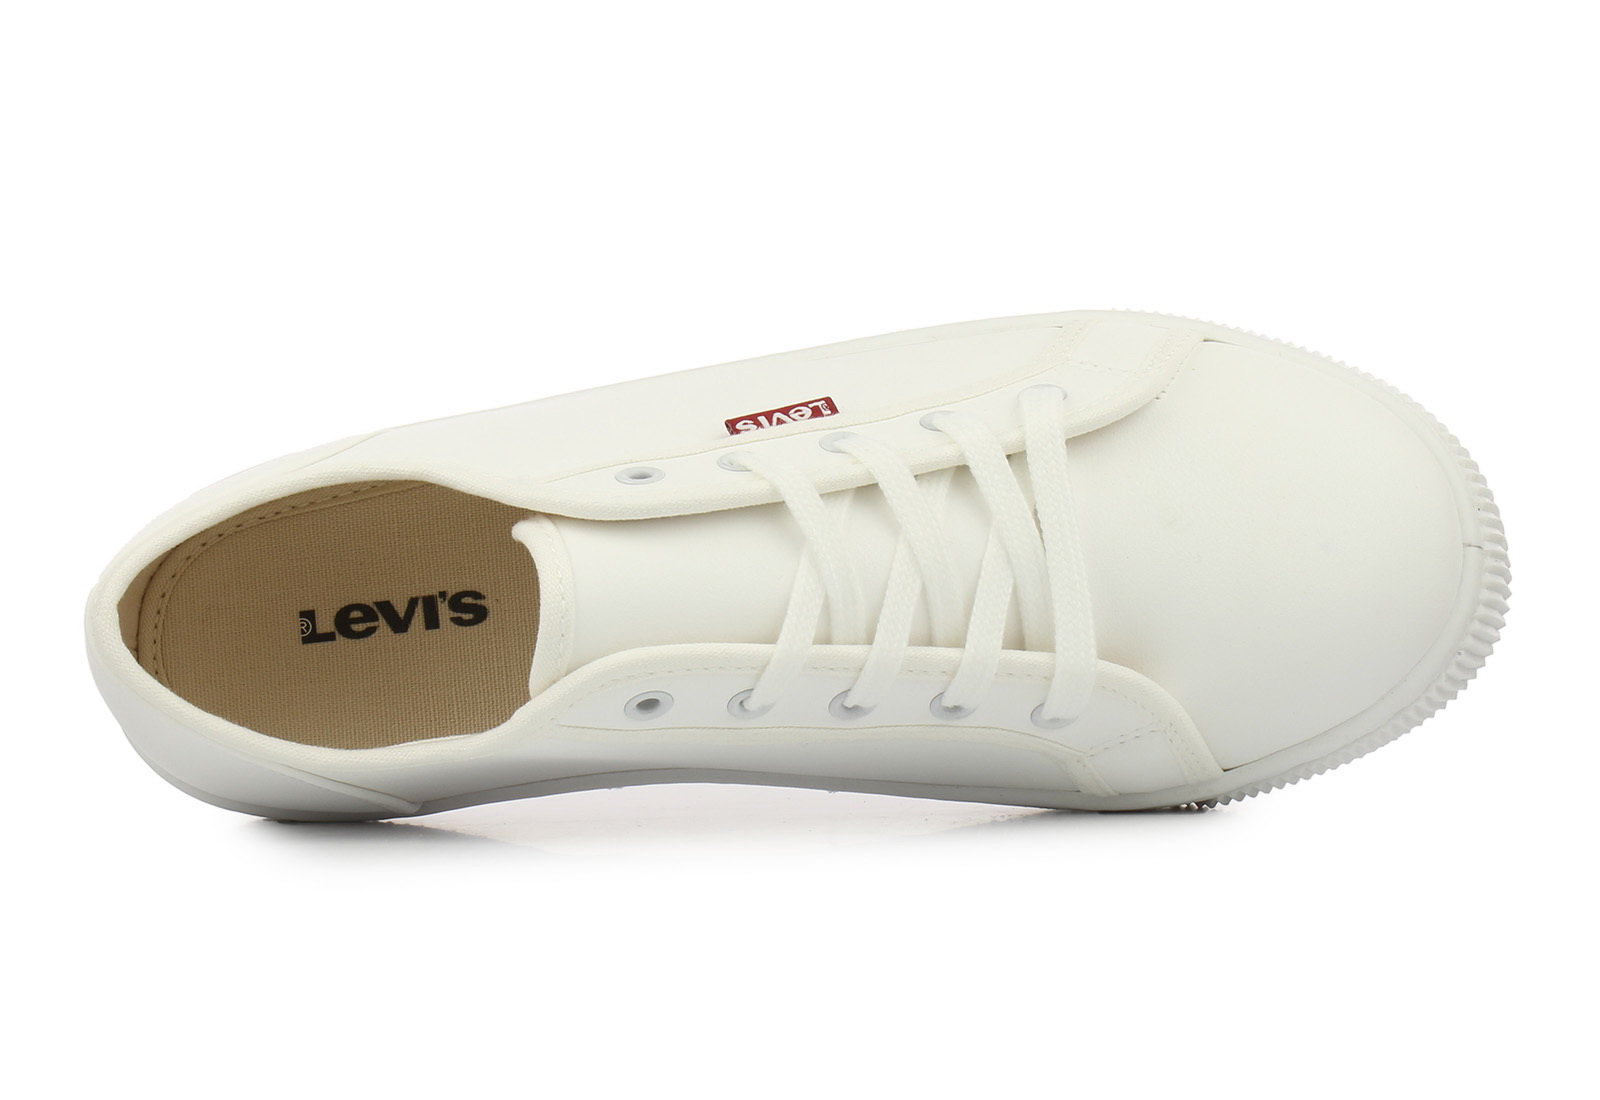 Levis Trainers - Malibu Beach S - 225849-661-51 - Online shop for sneakers,  shoes and boots